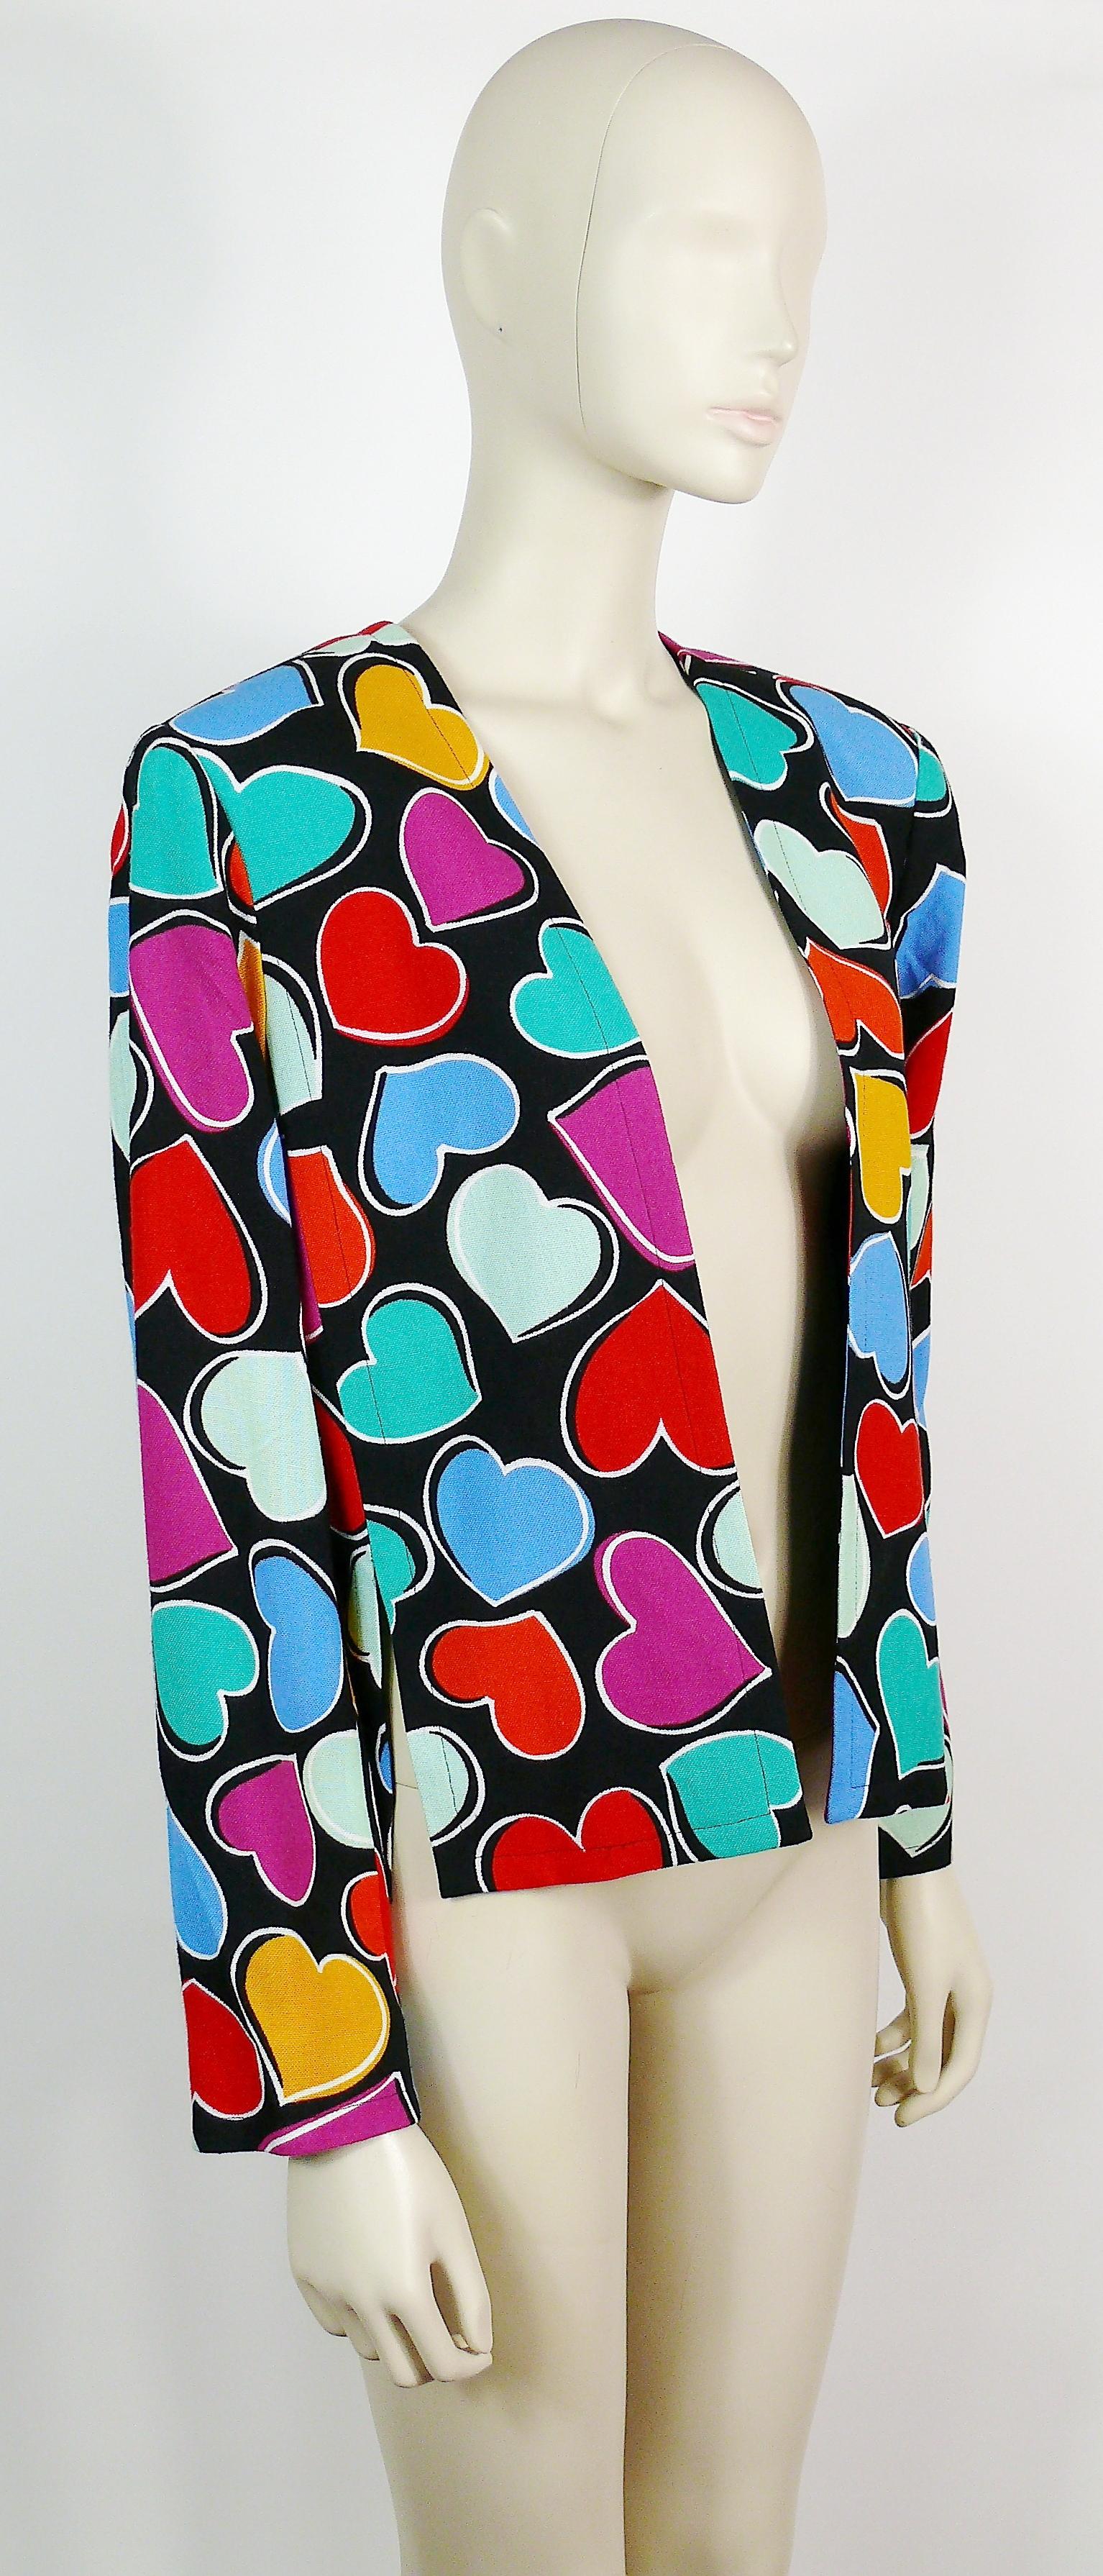 YVES SAINT LAURENT VARIATION vintage open jacket featuring a multicolour heart print all-over on a black background.

No buttons.
Fully lined.
Shoulder pads.

Label reads YVES SAINT LAURENT VARIATION.

Missing size label.
Please refer to